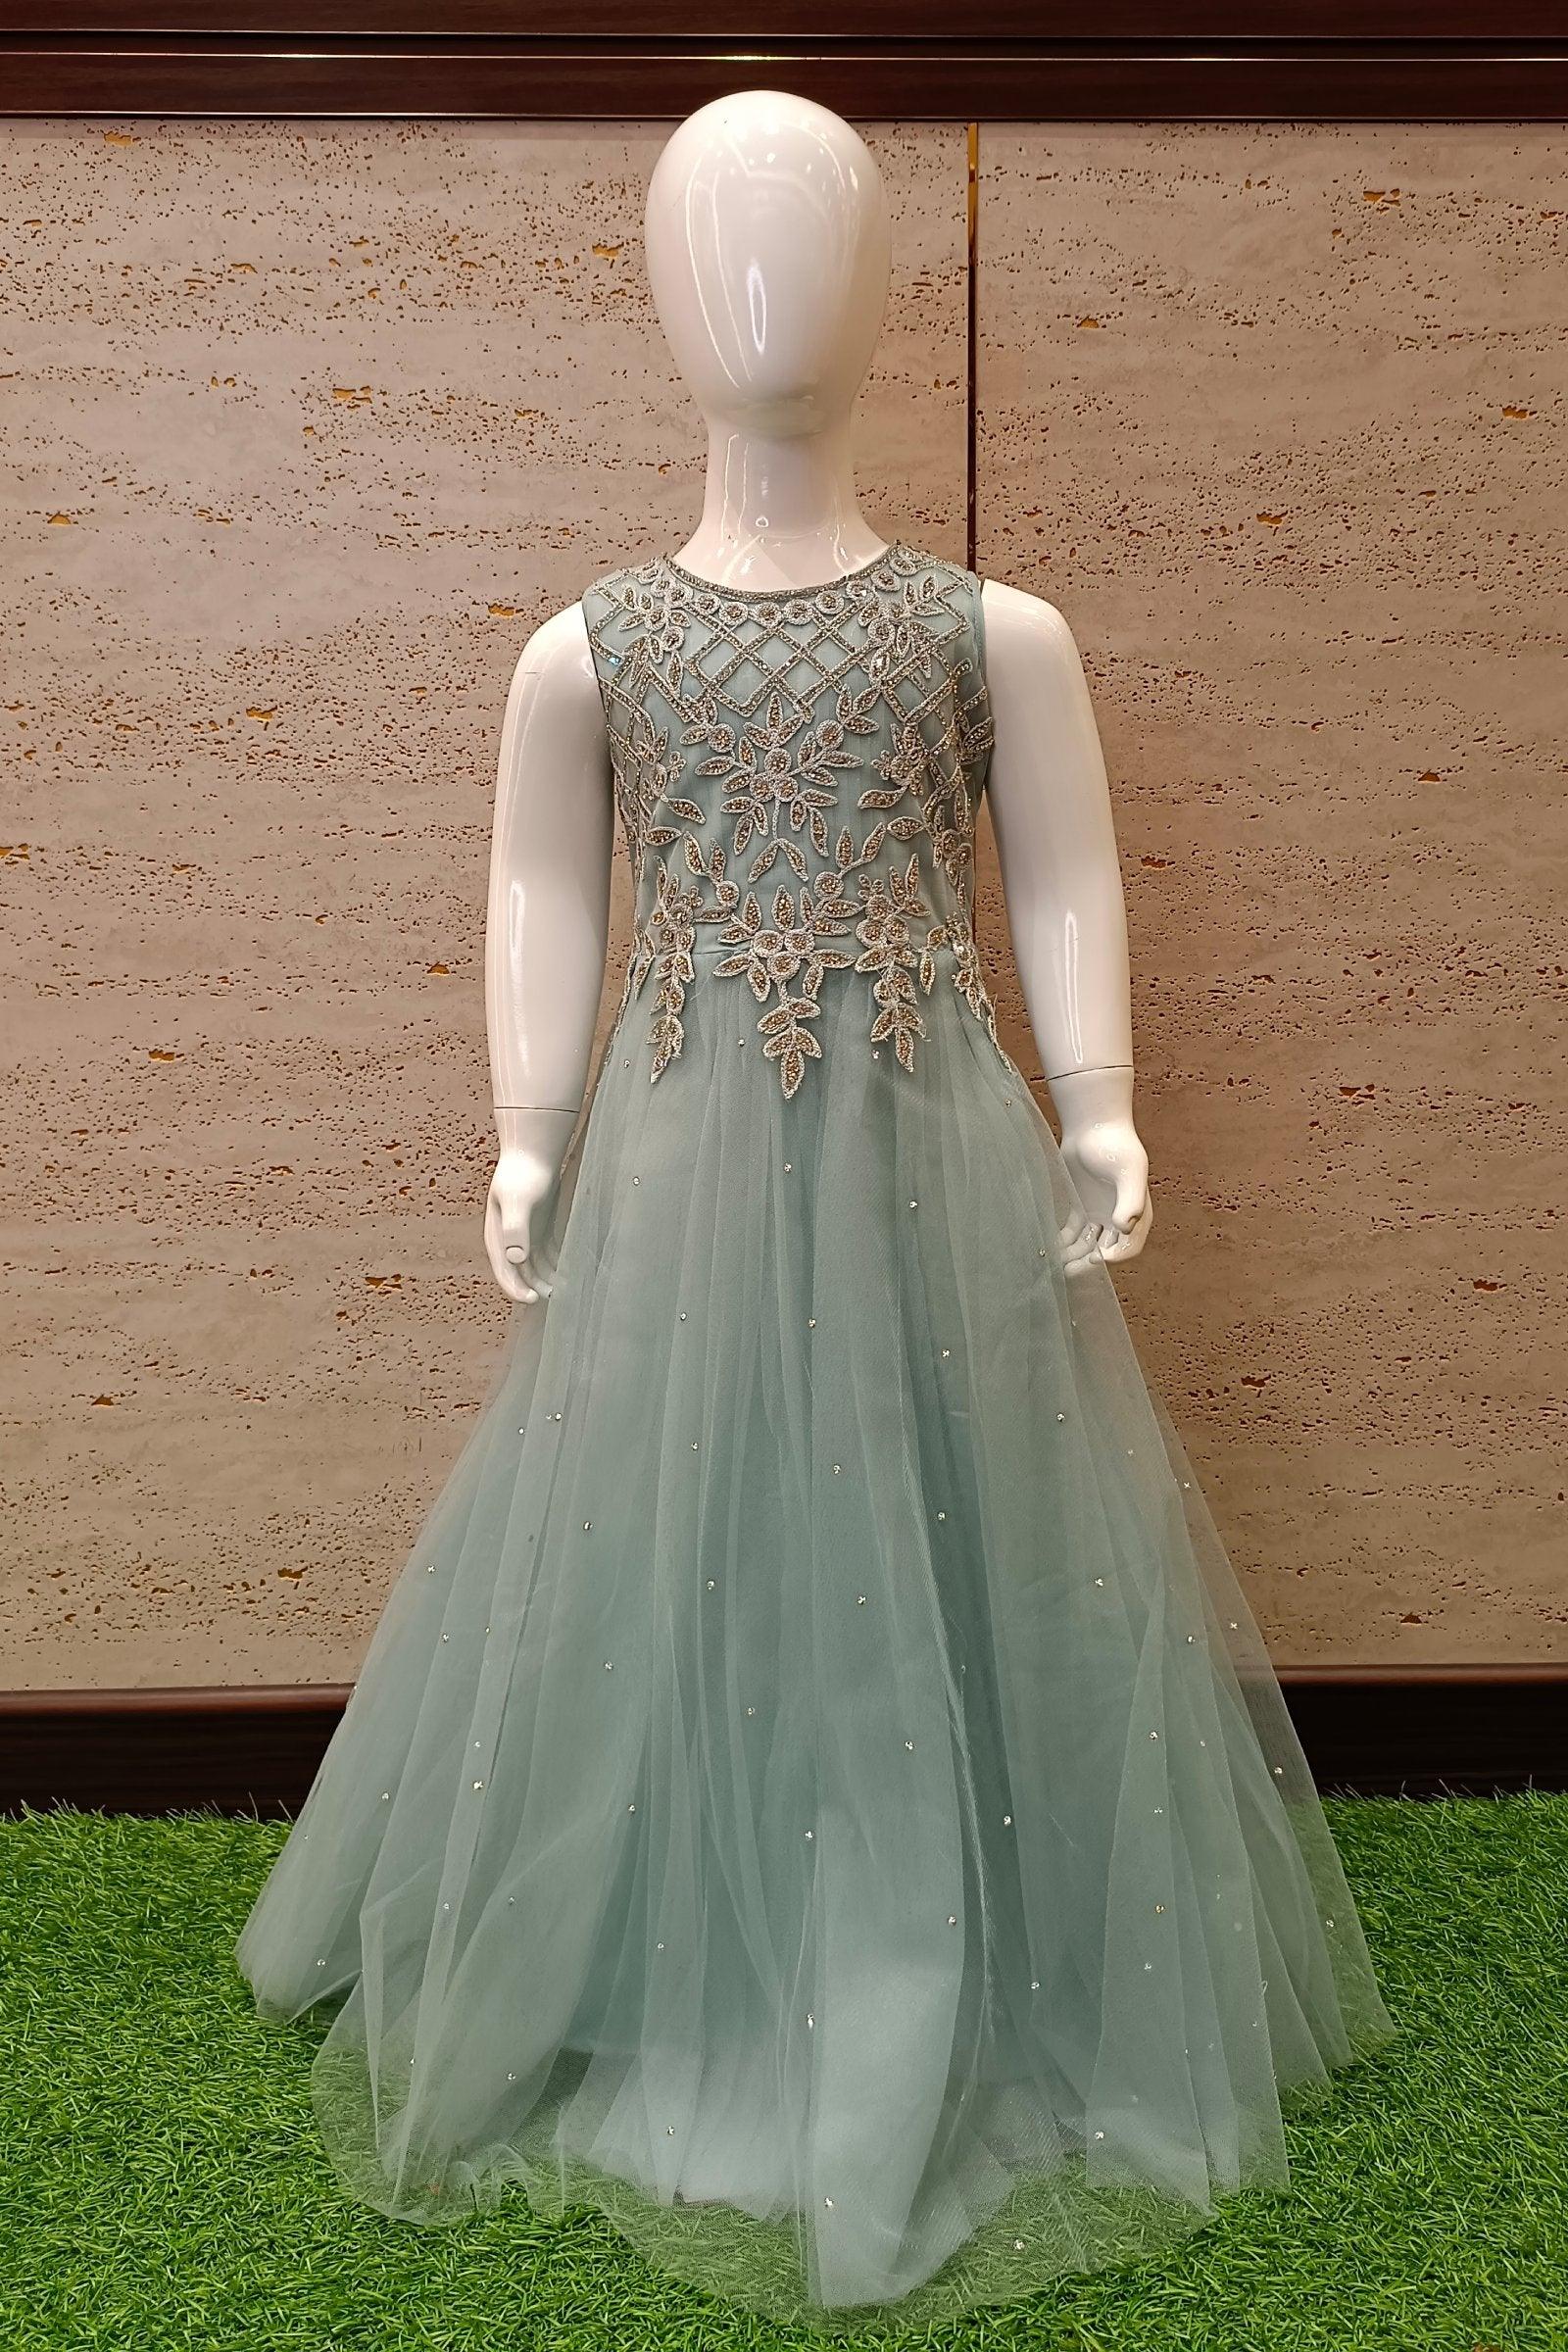 Ball Gowns | Full Skirt Gowns & Beaded to Satin Ball Gowns | Windsor